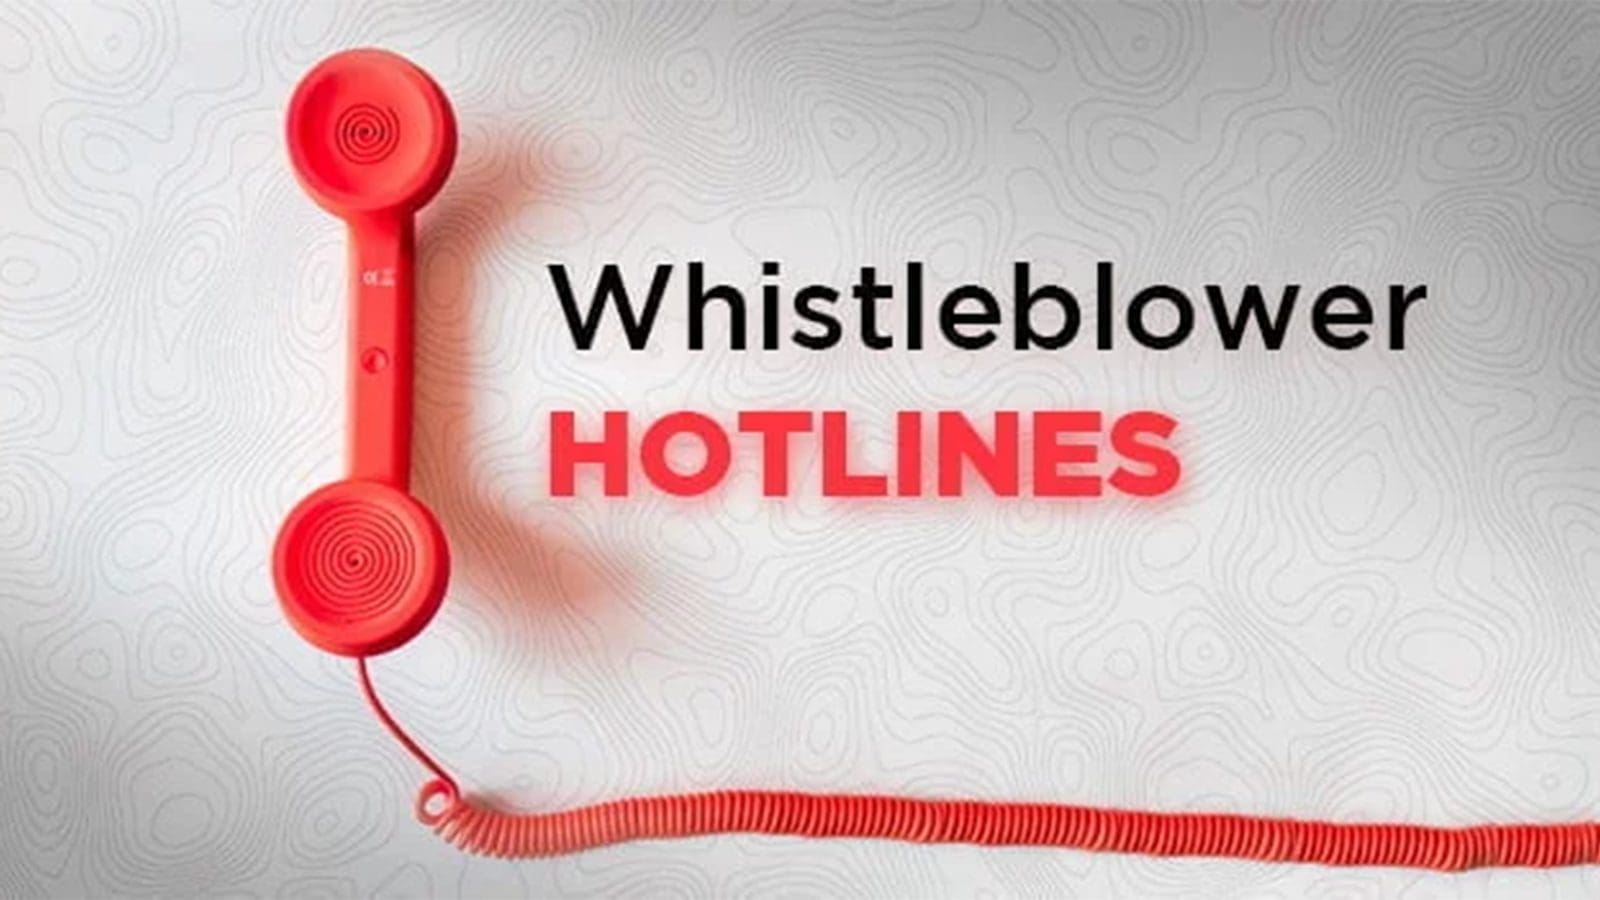 UK Food Standards Agency launches whistleblower hotline in battle against food fraud